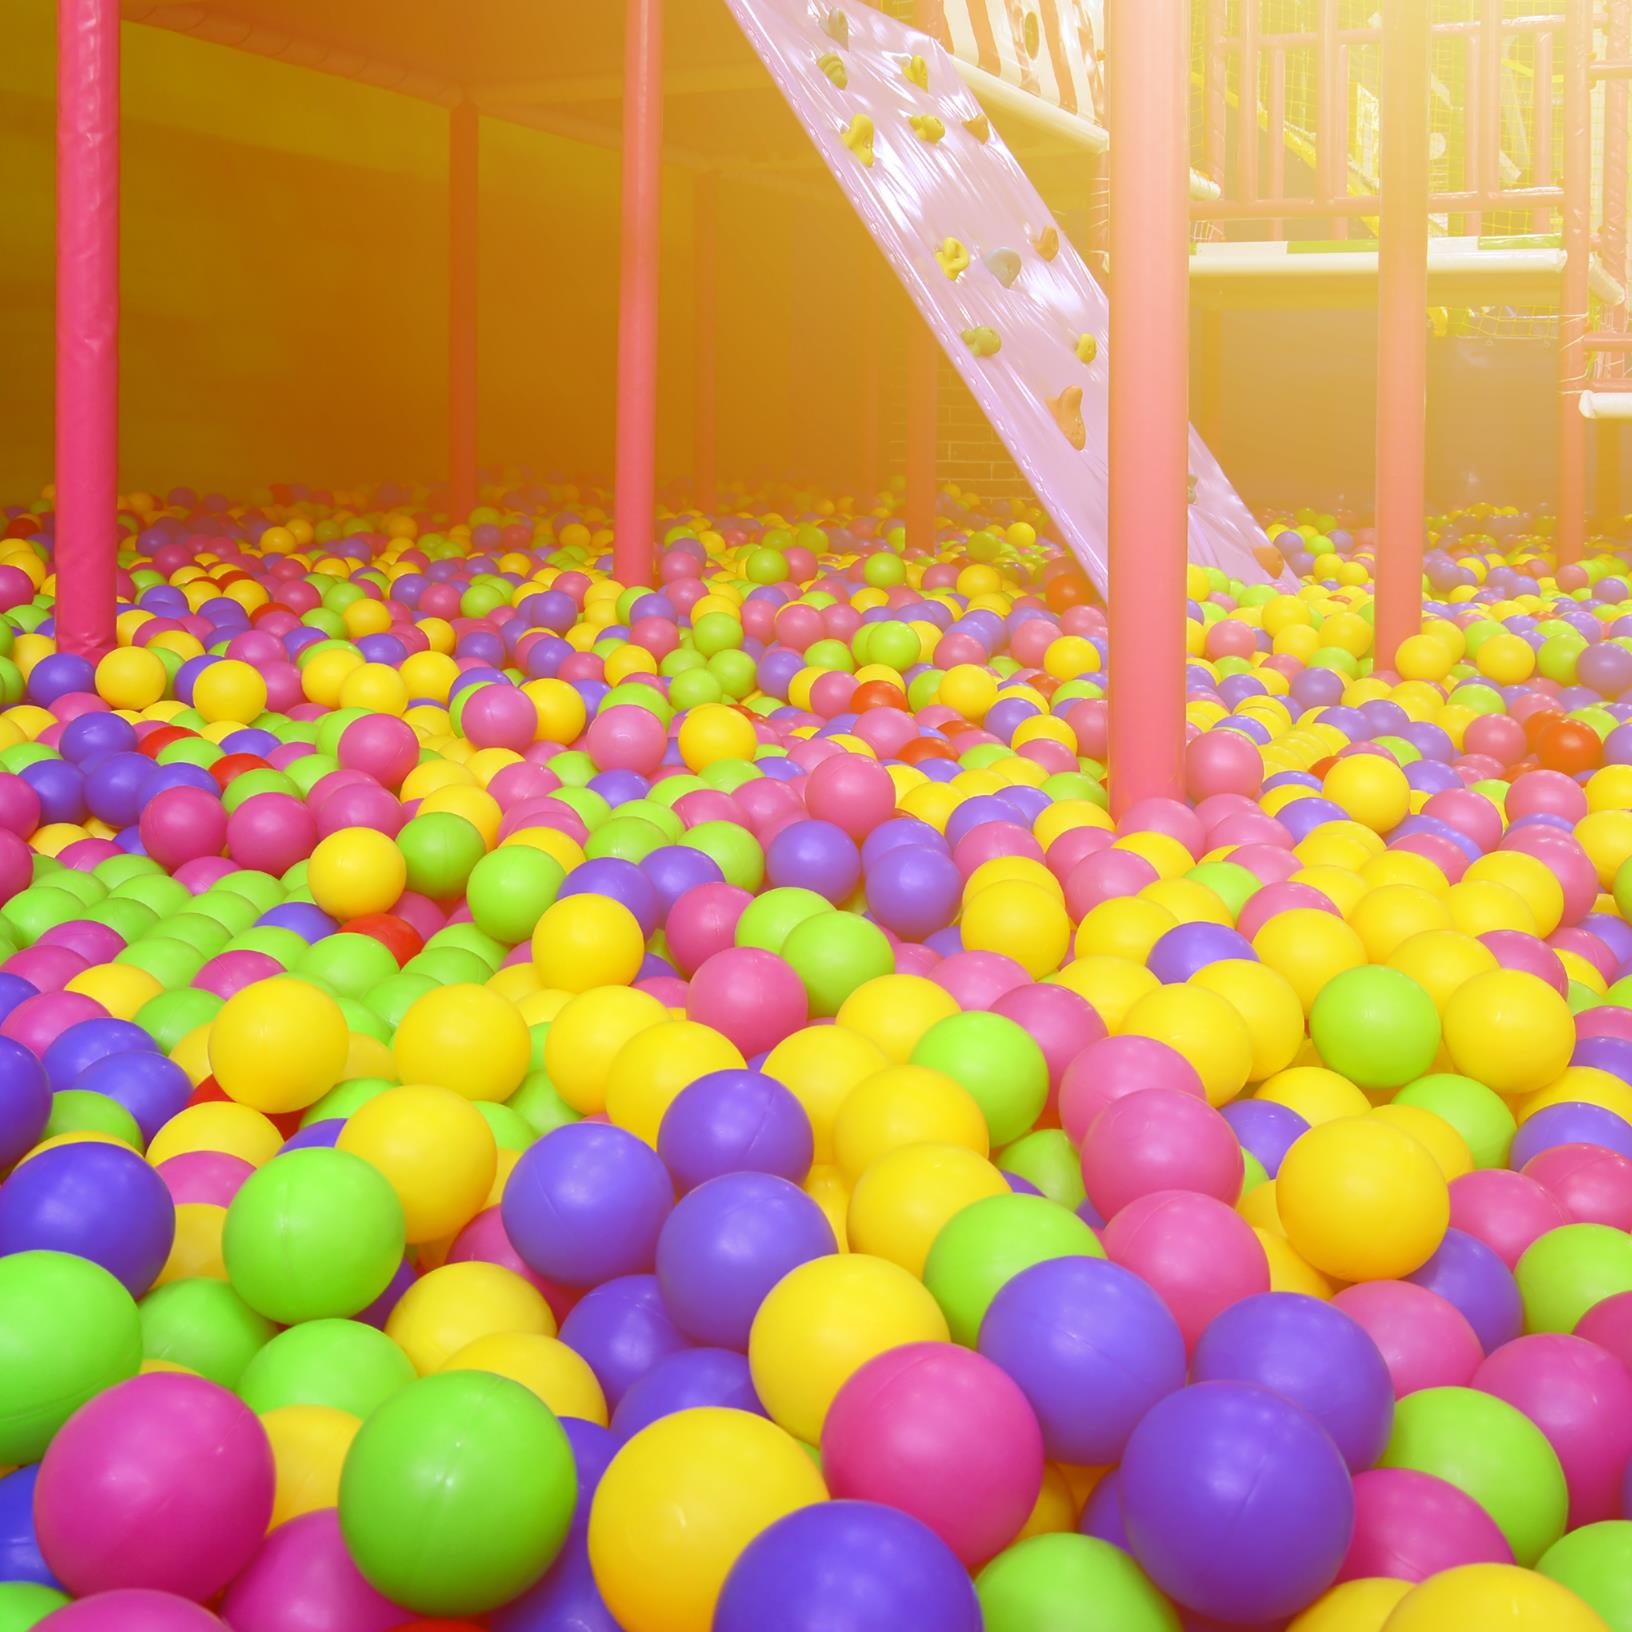 Many colorful plastic balls in a kids’ ballpit at a playground